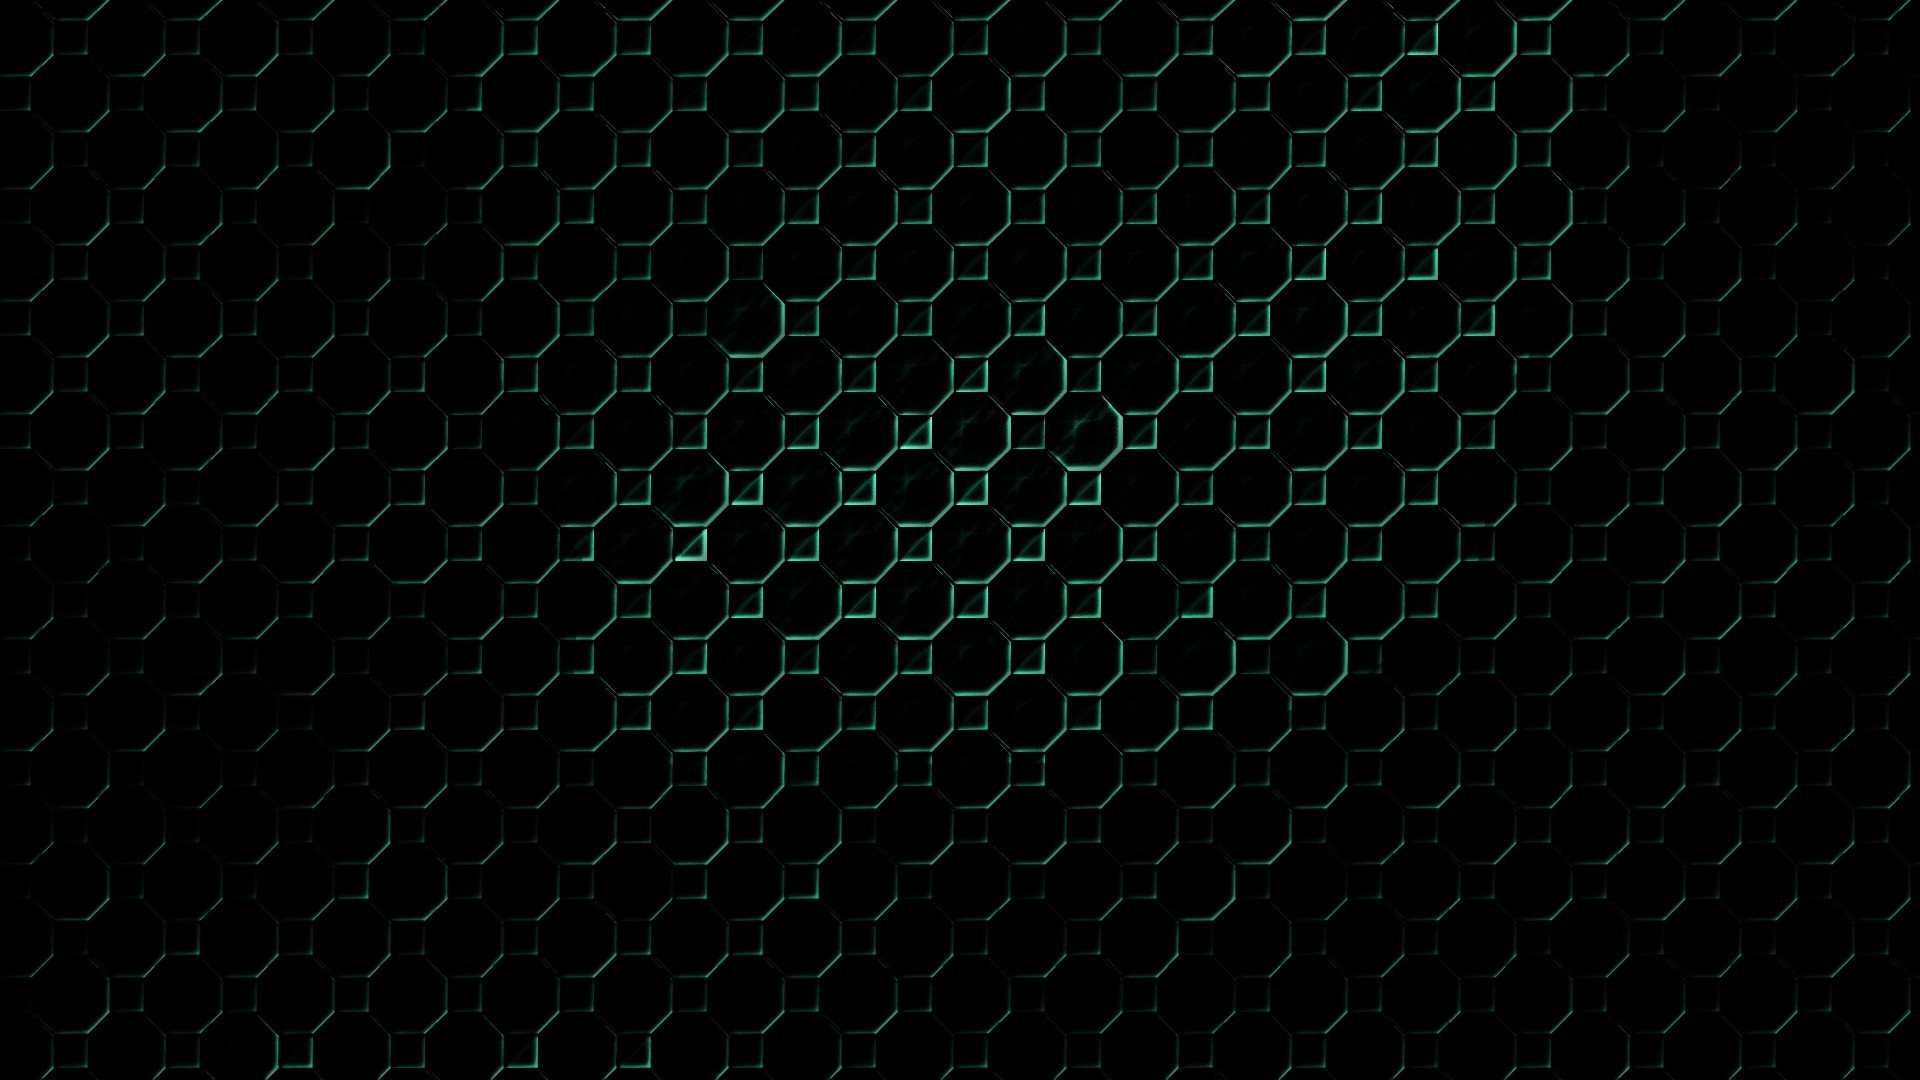 General 1920x1080 minimalism abstract pattern digital art geometry square octagons black background texture